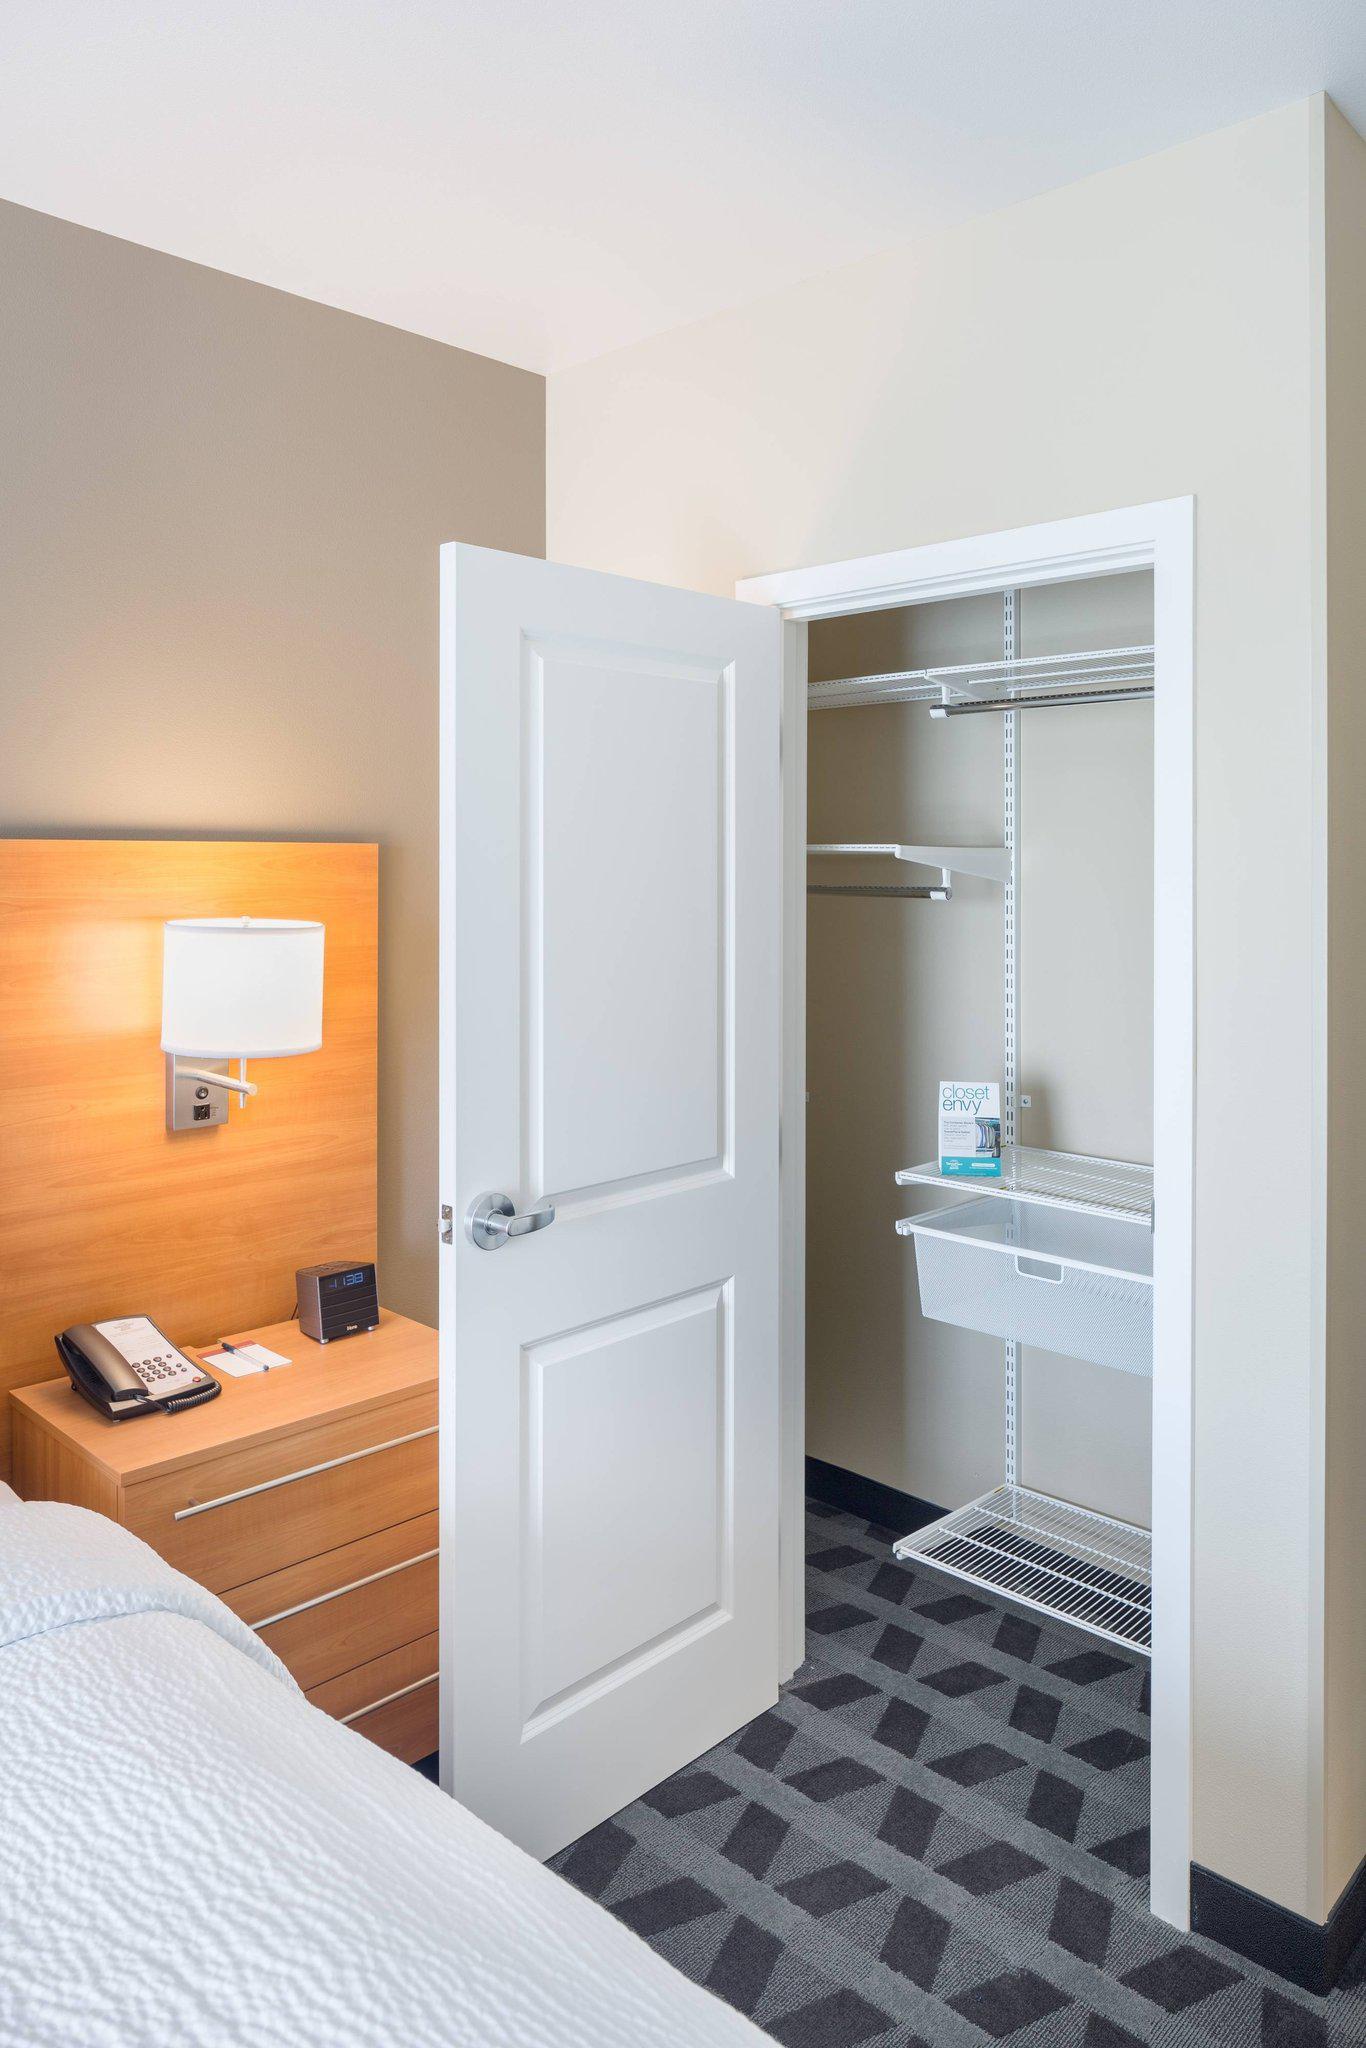 TownePlace Suites by Marriott Portland Vancouver